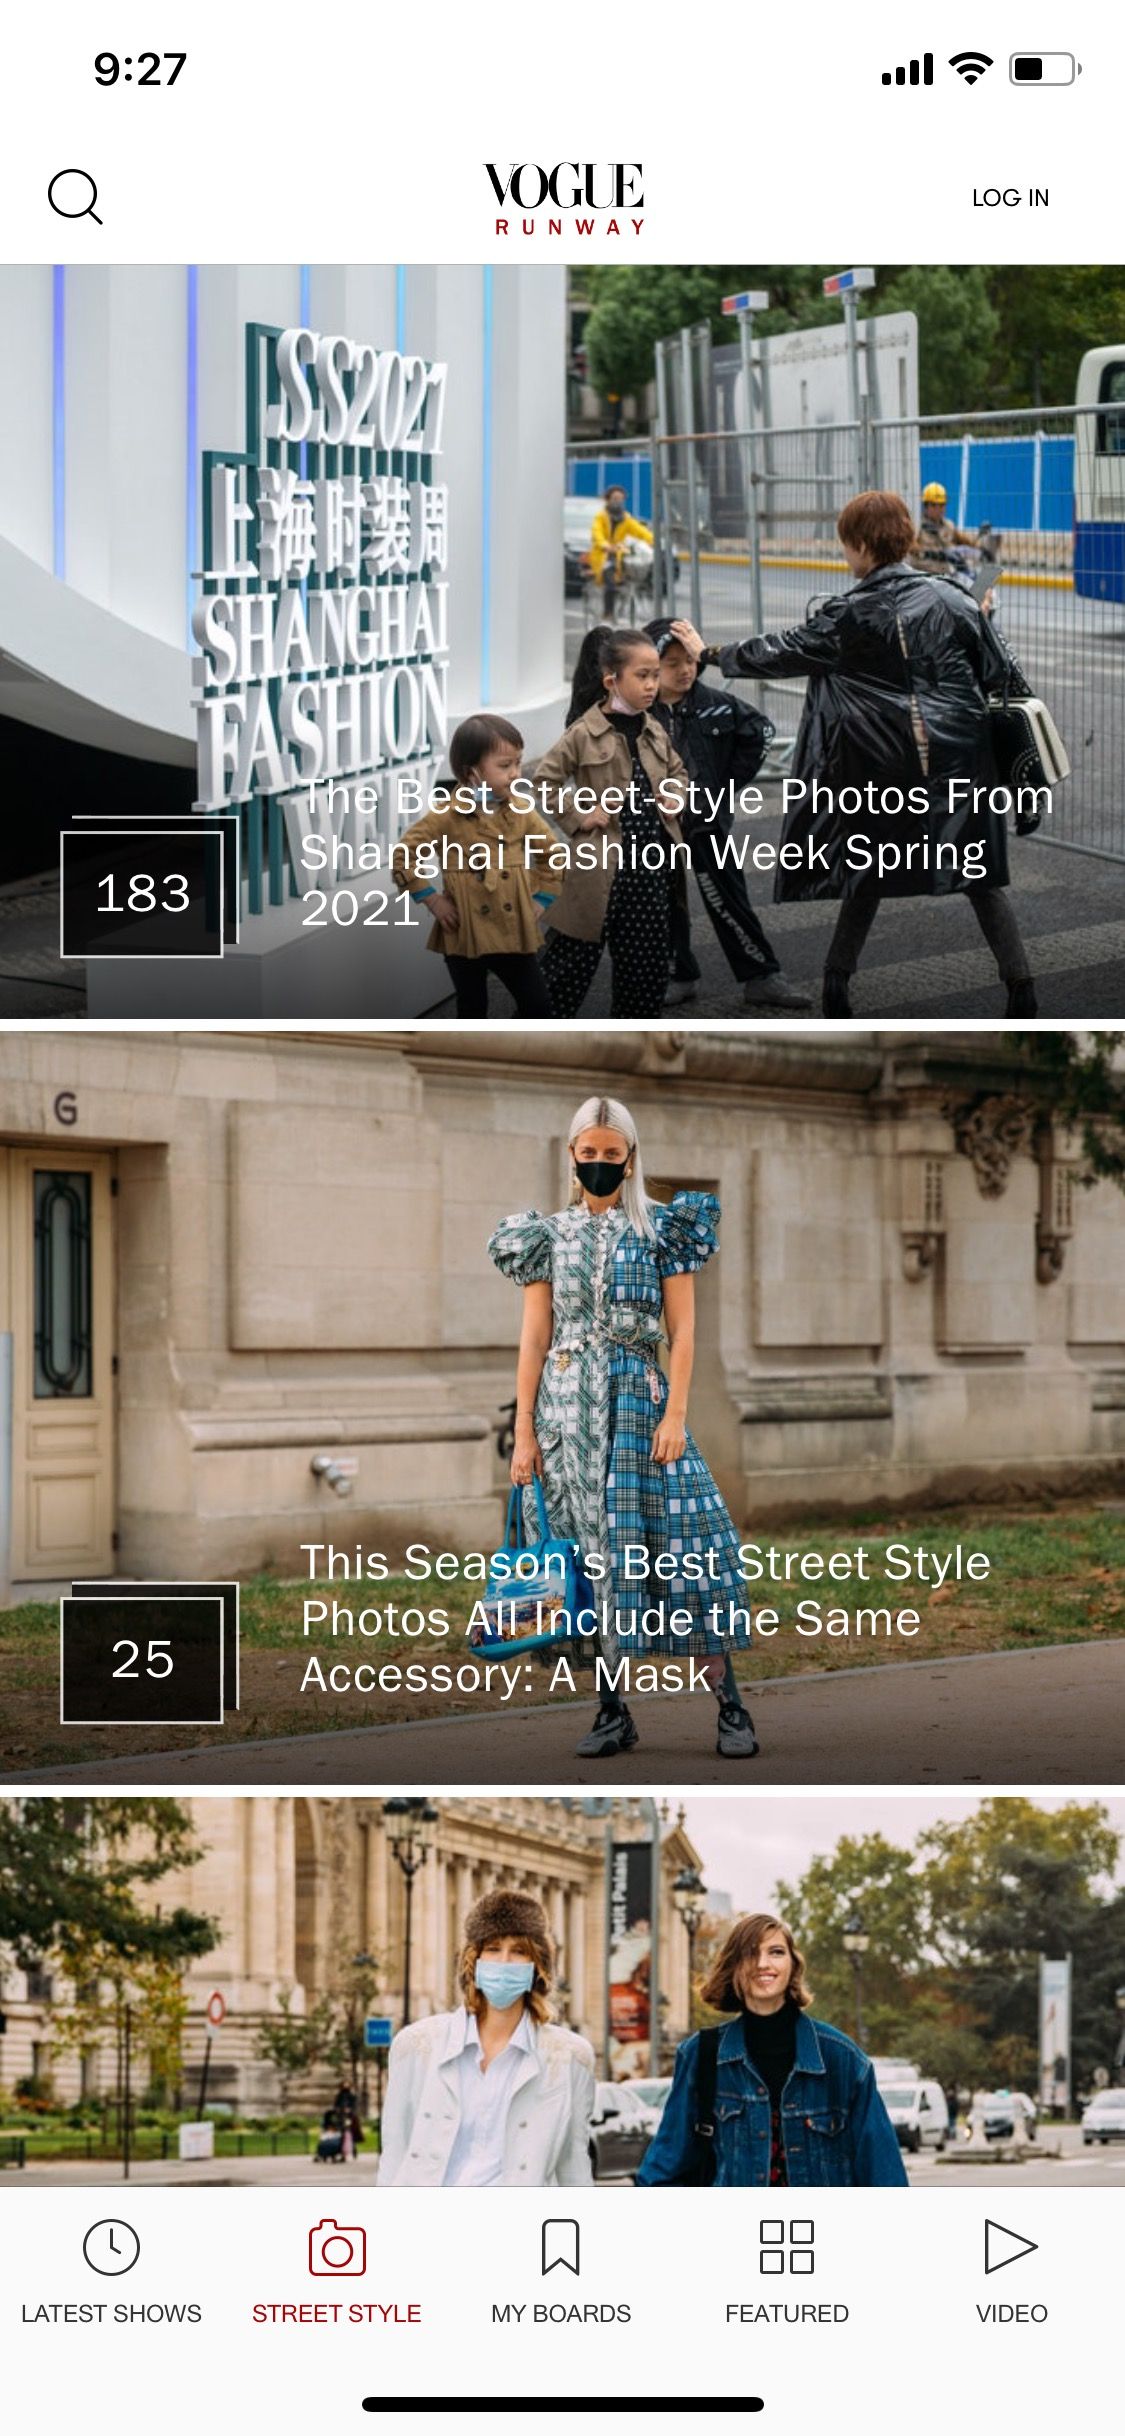 Street style on latest fashion shows on the Vogue Runway app.